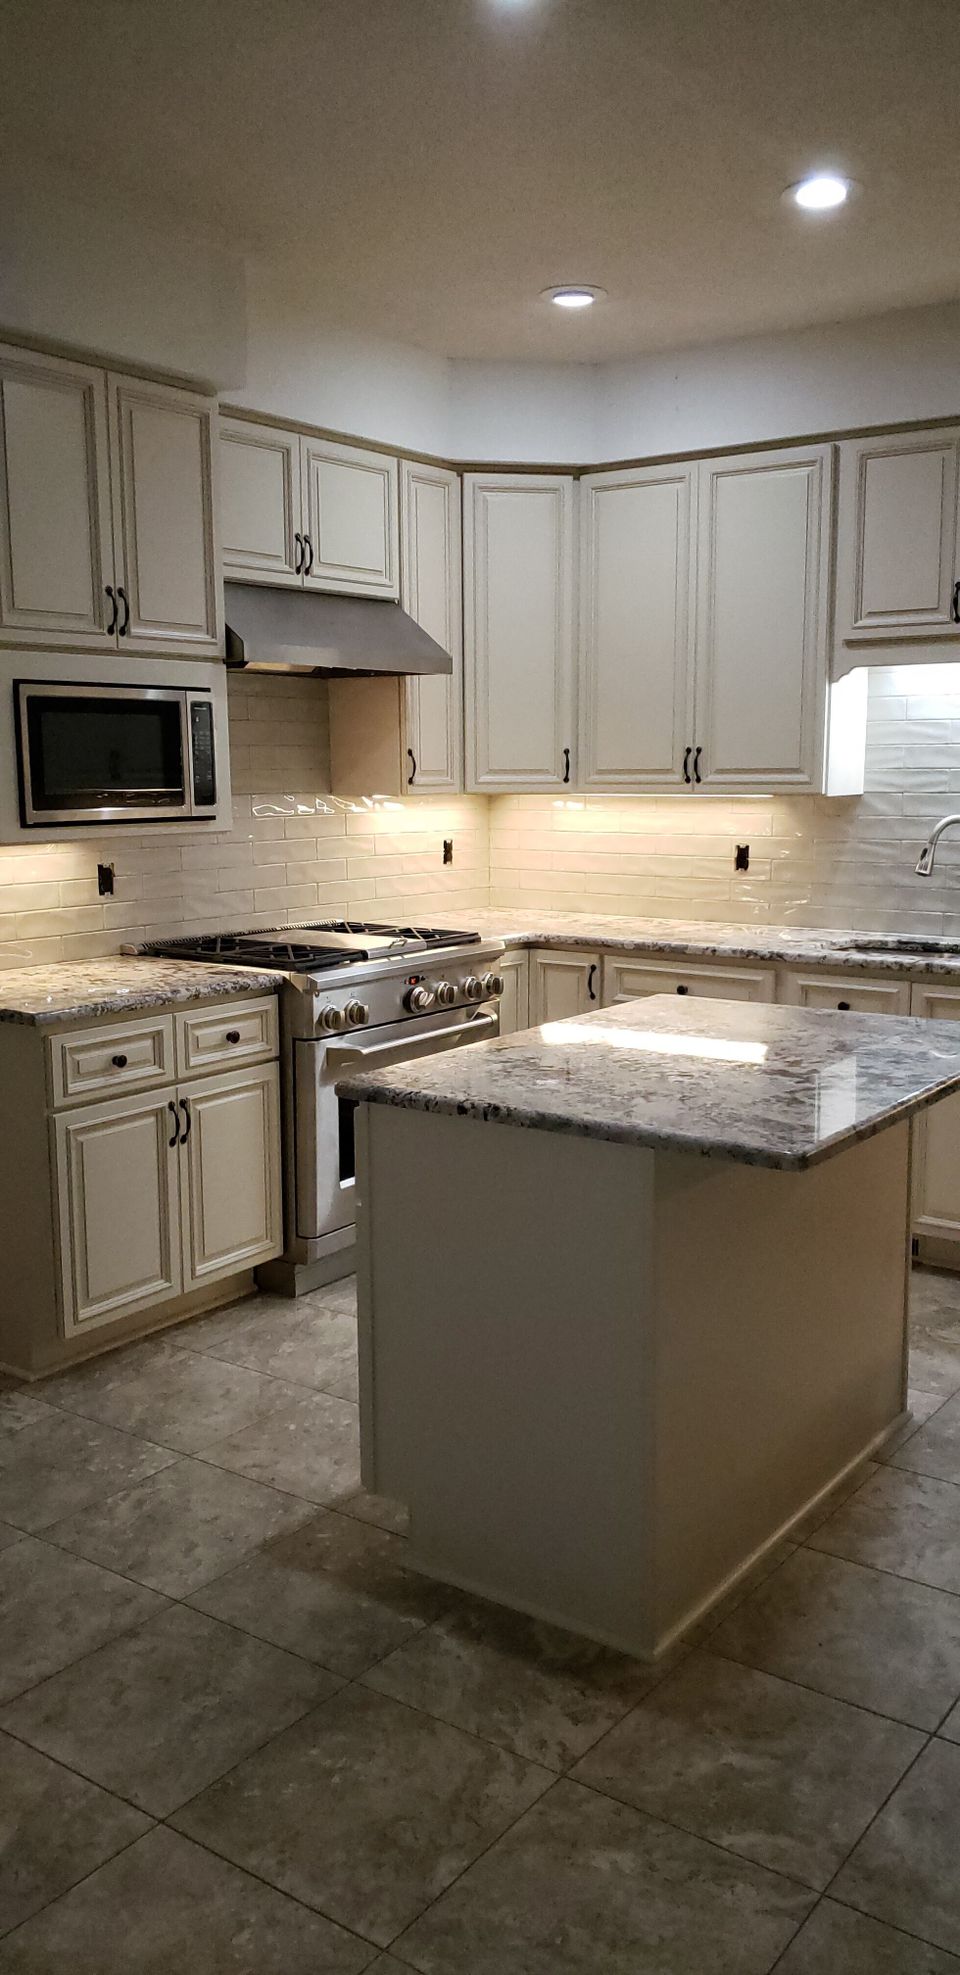 Best Morrisville NC kitchen remodeling company